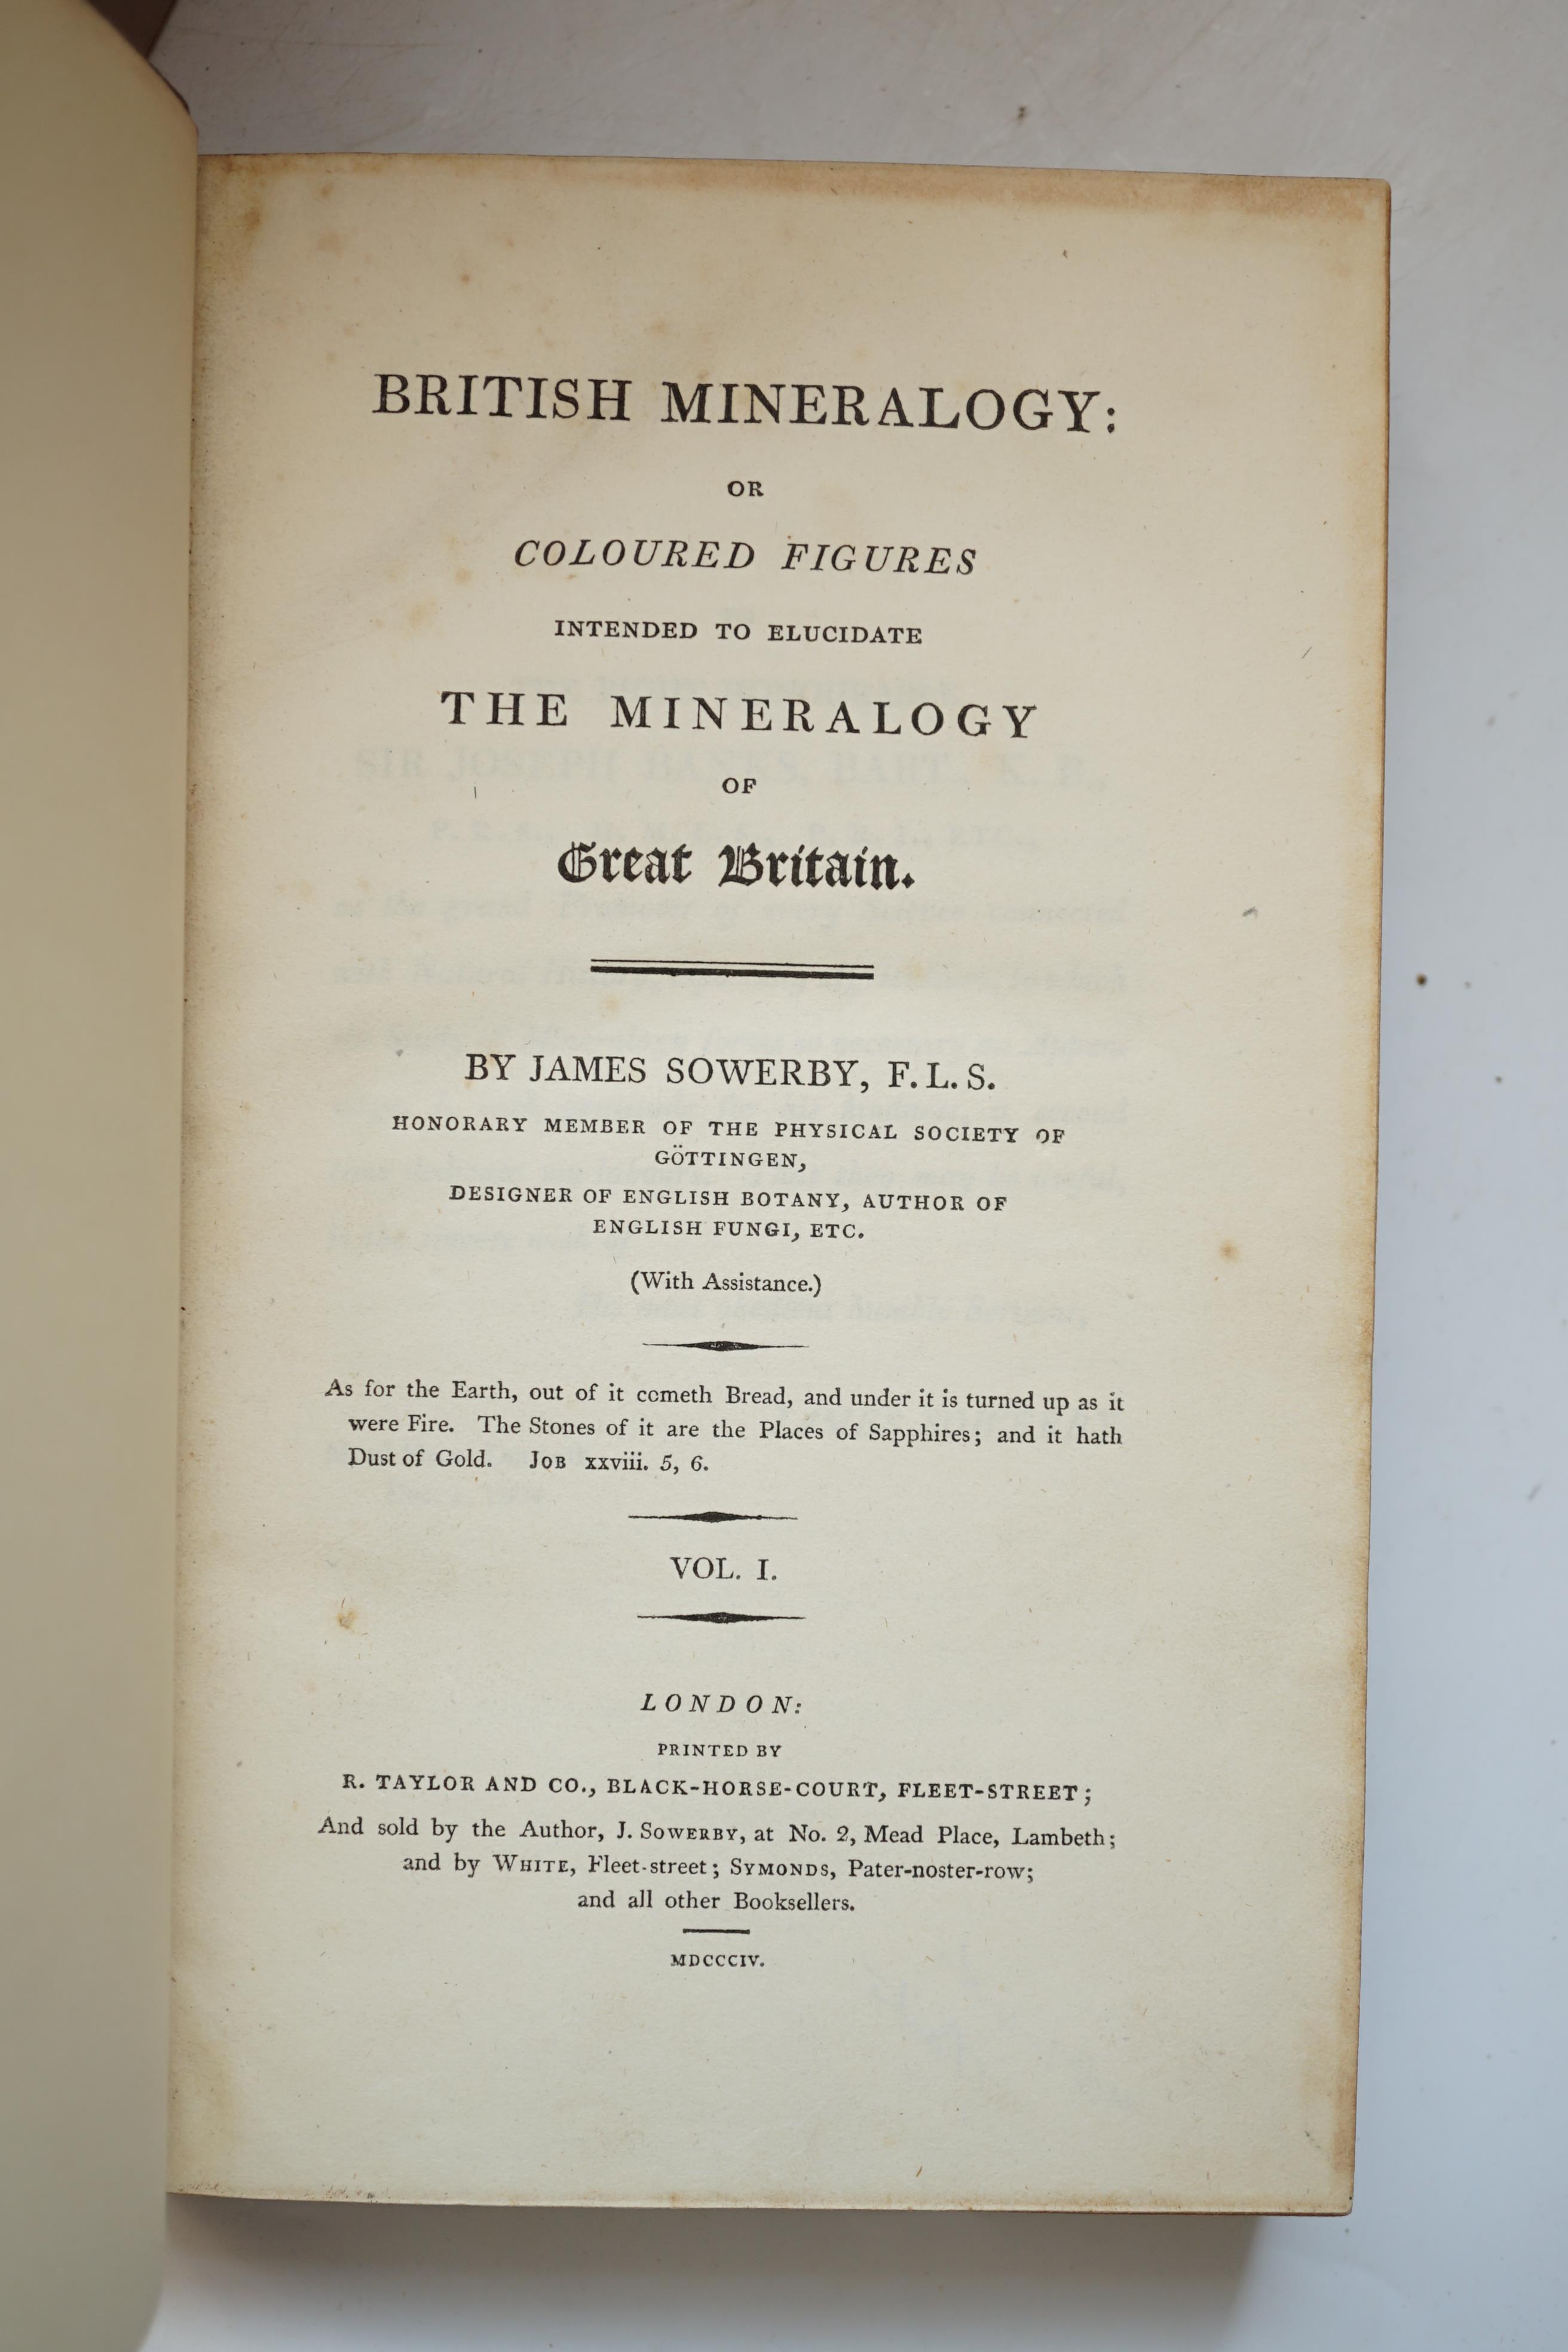 Sowerby, James - British Mineralogy: or Coloured Figures of intended to Elucidate the Mineralogy of Great Britain , 5 vols, 543 (of 550) hand-coloured plates, 24 pp. index at end of vol 5, lacks CCCXXVIX-CCCXXXVI (7 plat